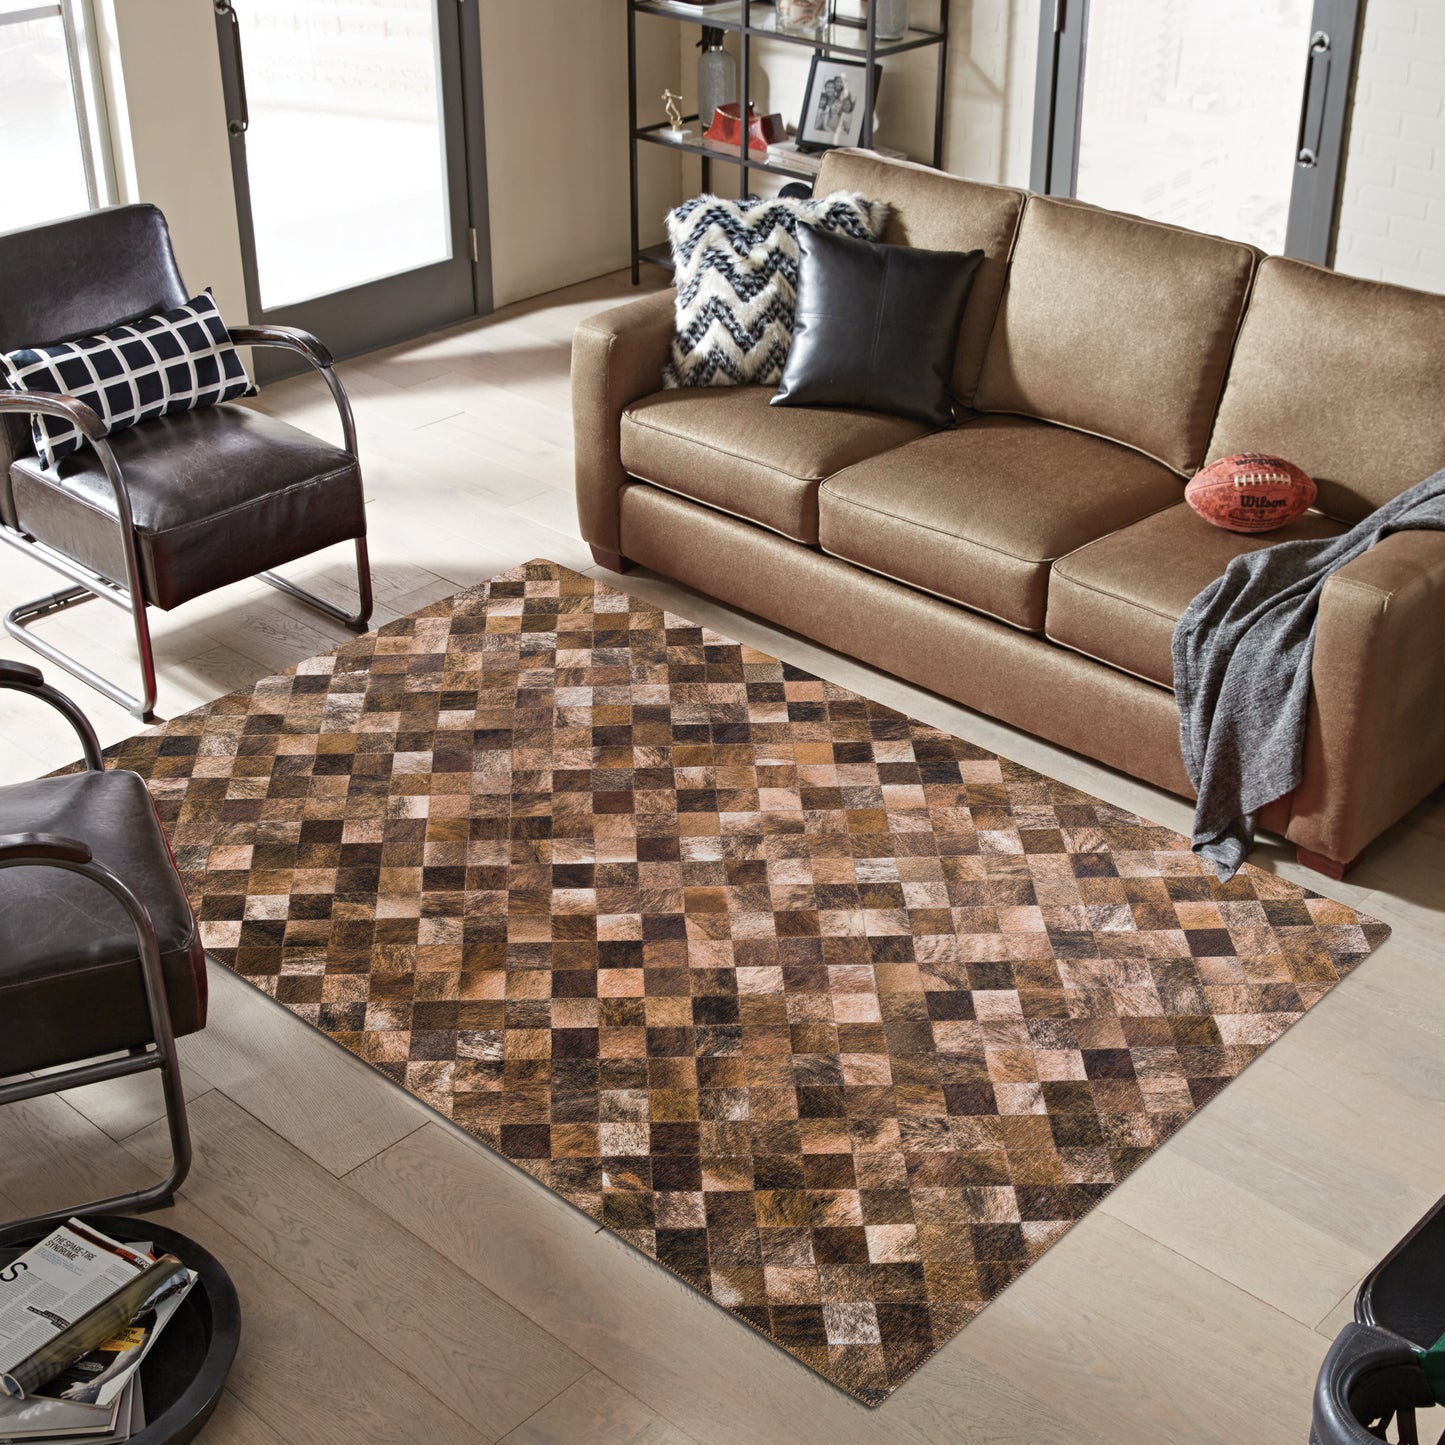 Stetson SS2 Machine Made Synthetic Blend Indoor Area Rug by Dalyn Rugs